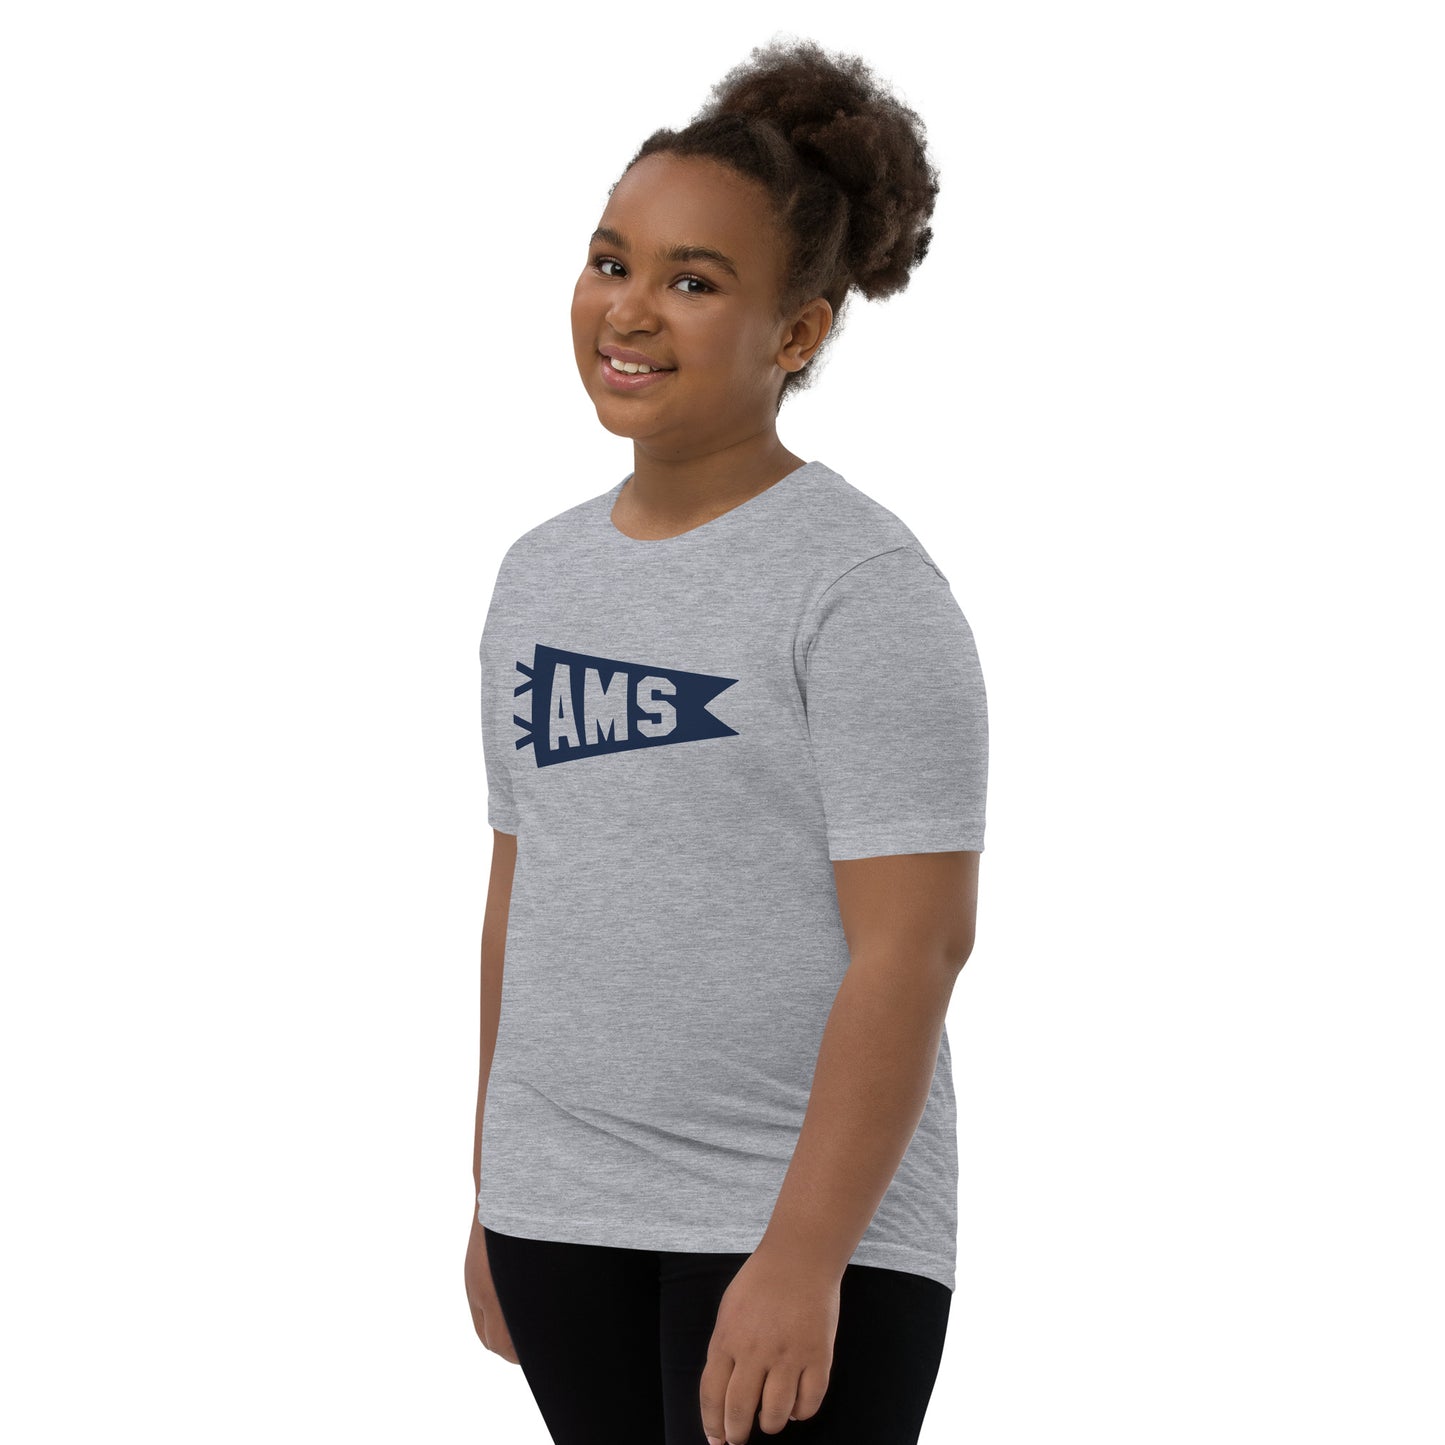 Kid's Airport Code Tee - Navy Blue Graphic • AMS Amsterdam • YHM Designs - Image 04